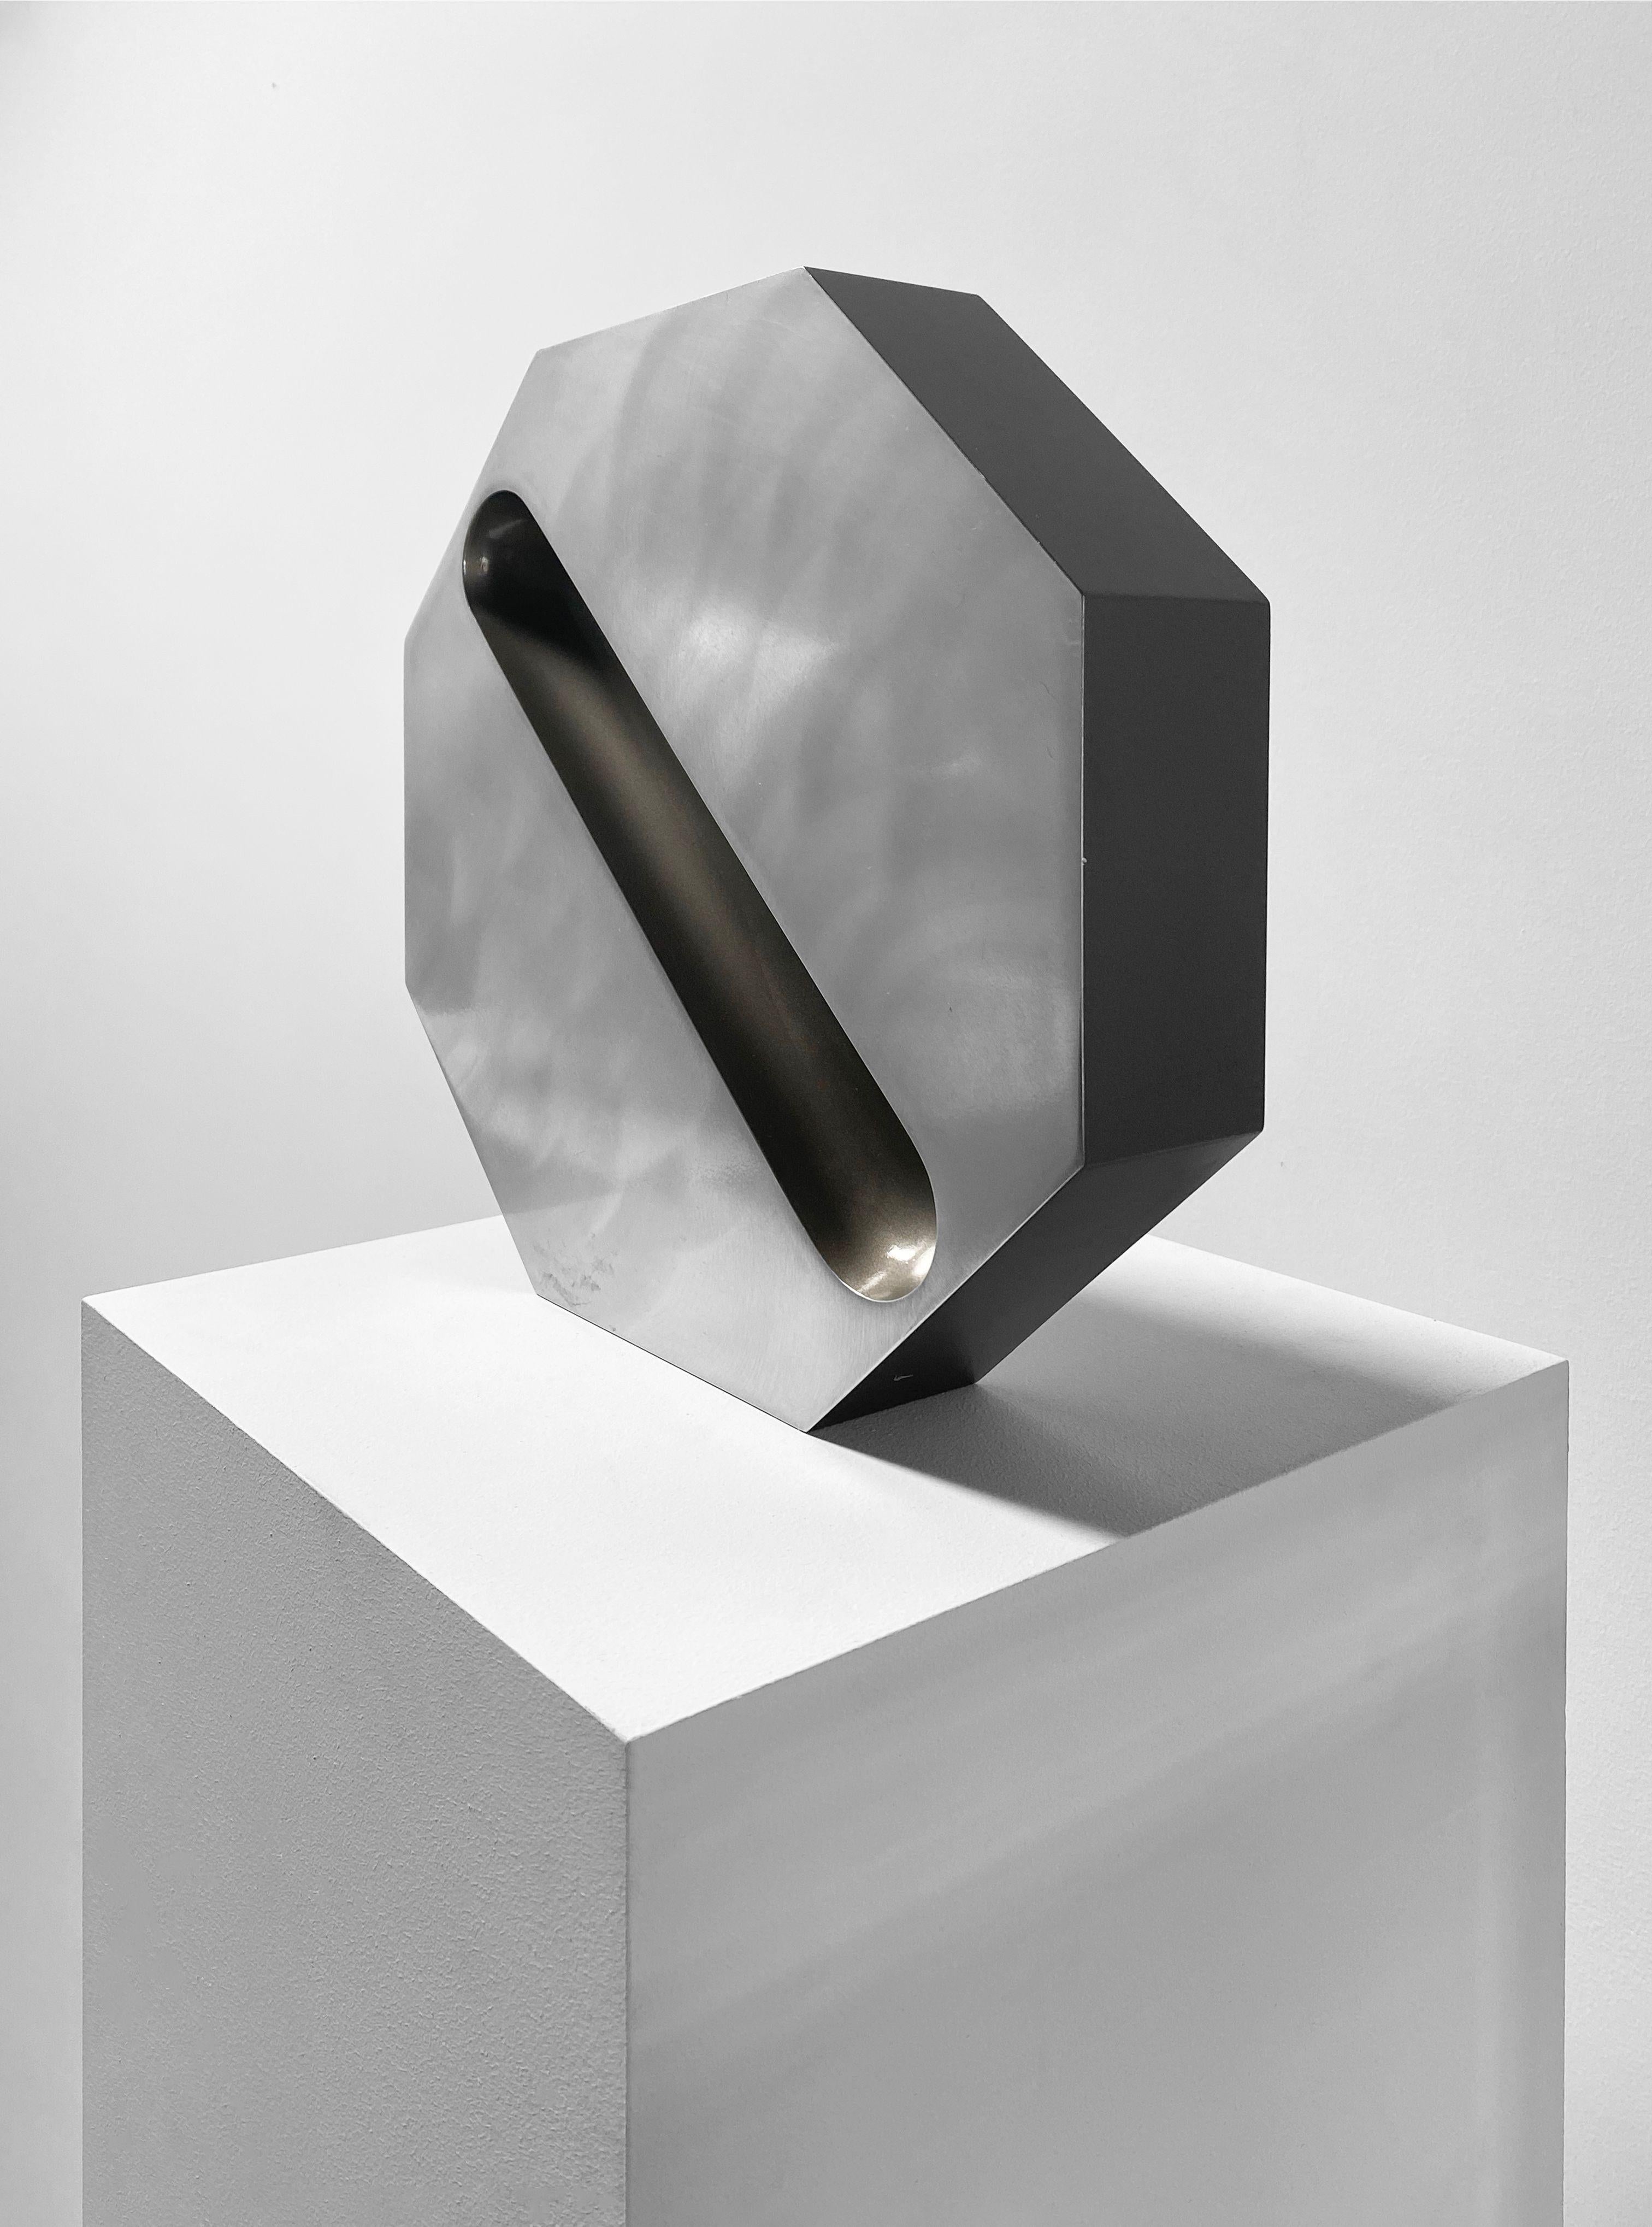 Dr. Q, 1967
Brushed Stainless Steel, Lacquer
12.75 x 12.75 x 2.5